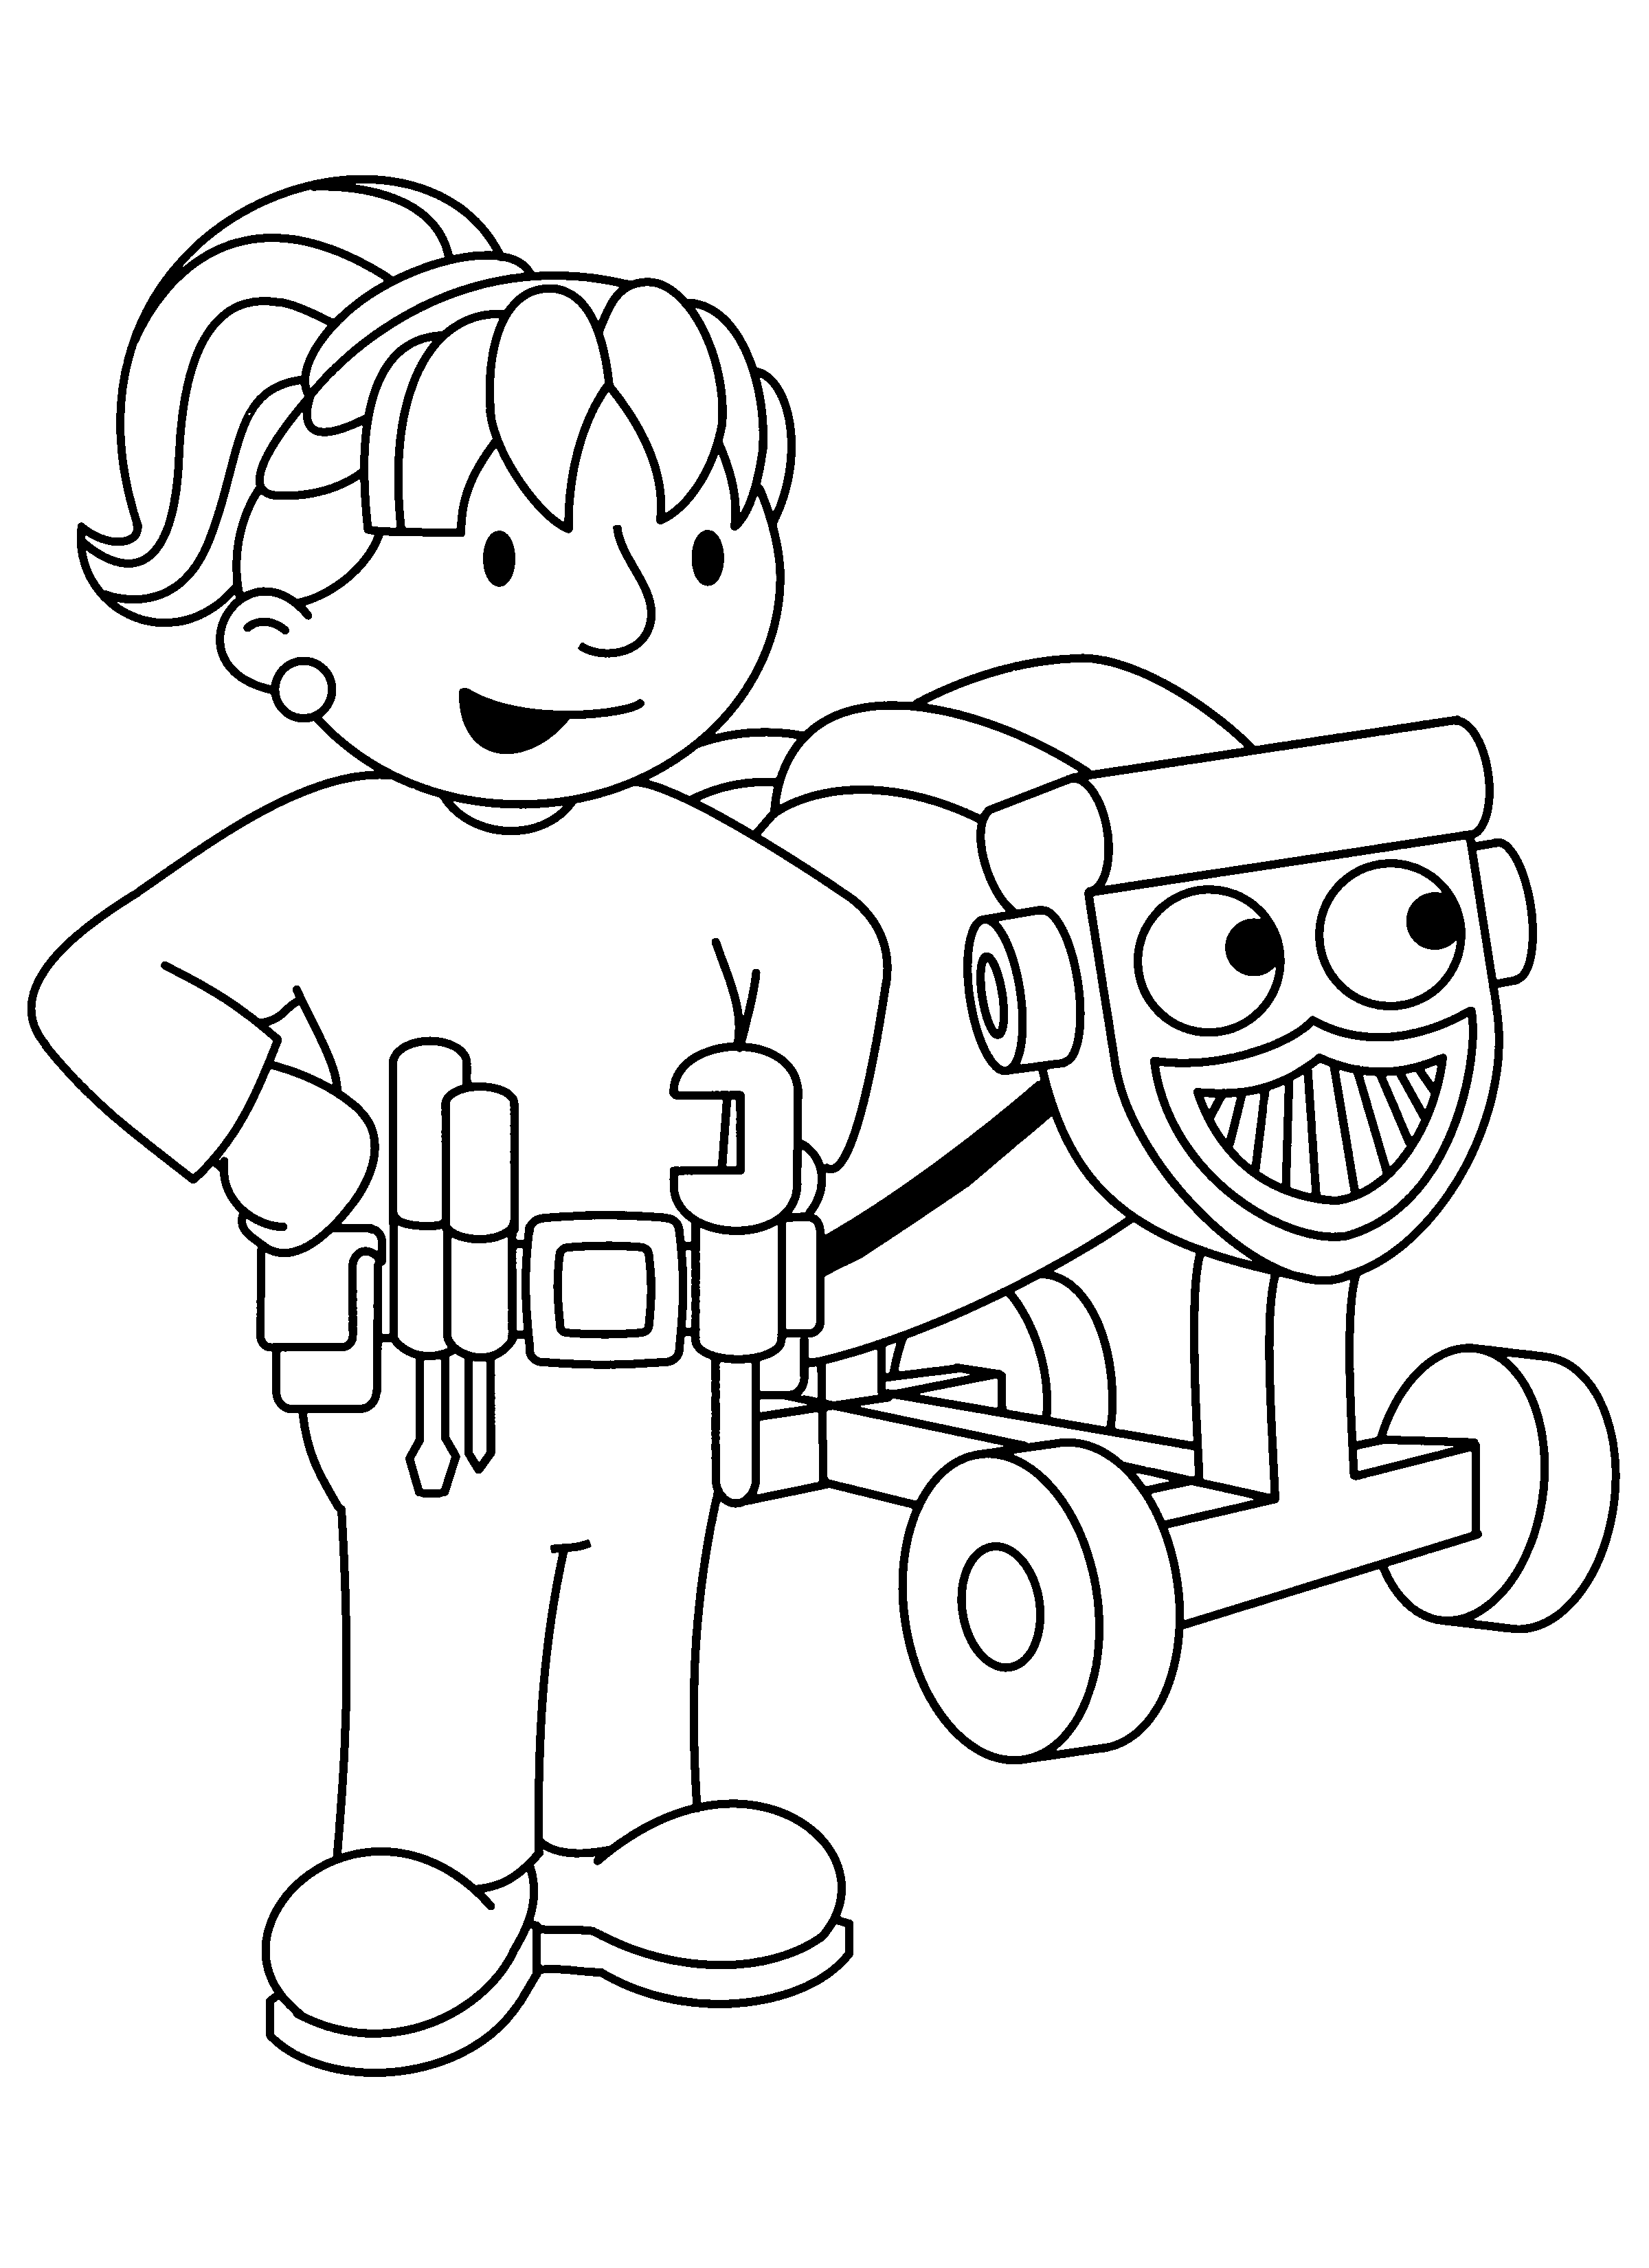 bob-the-builder coloring pages for kids,printable,coloring pages